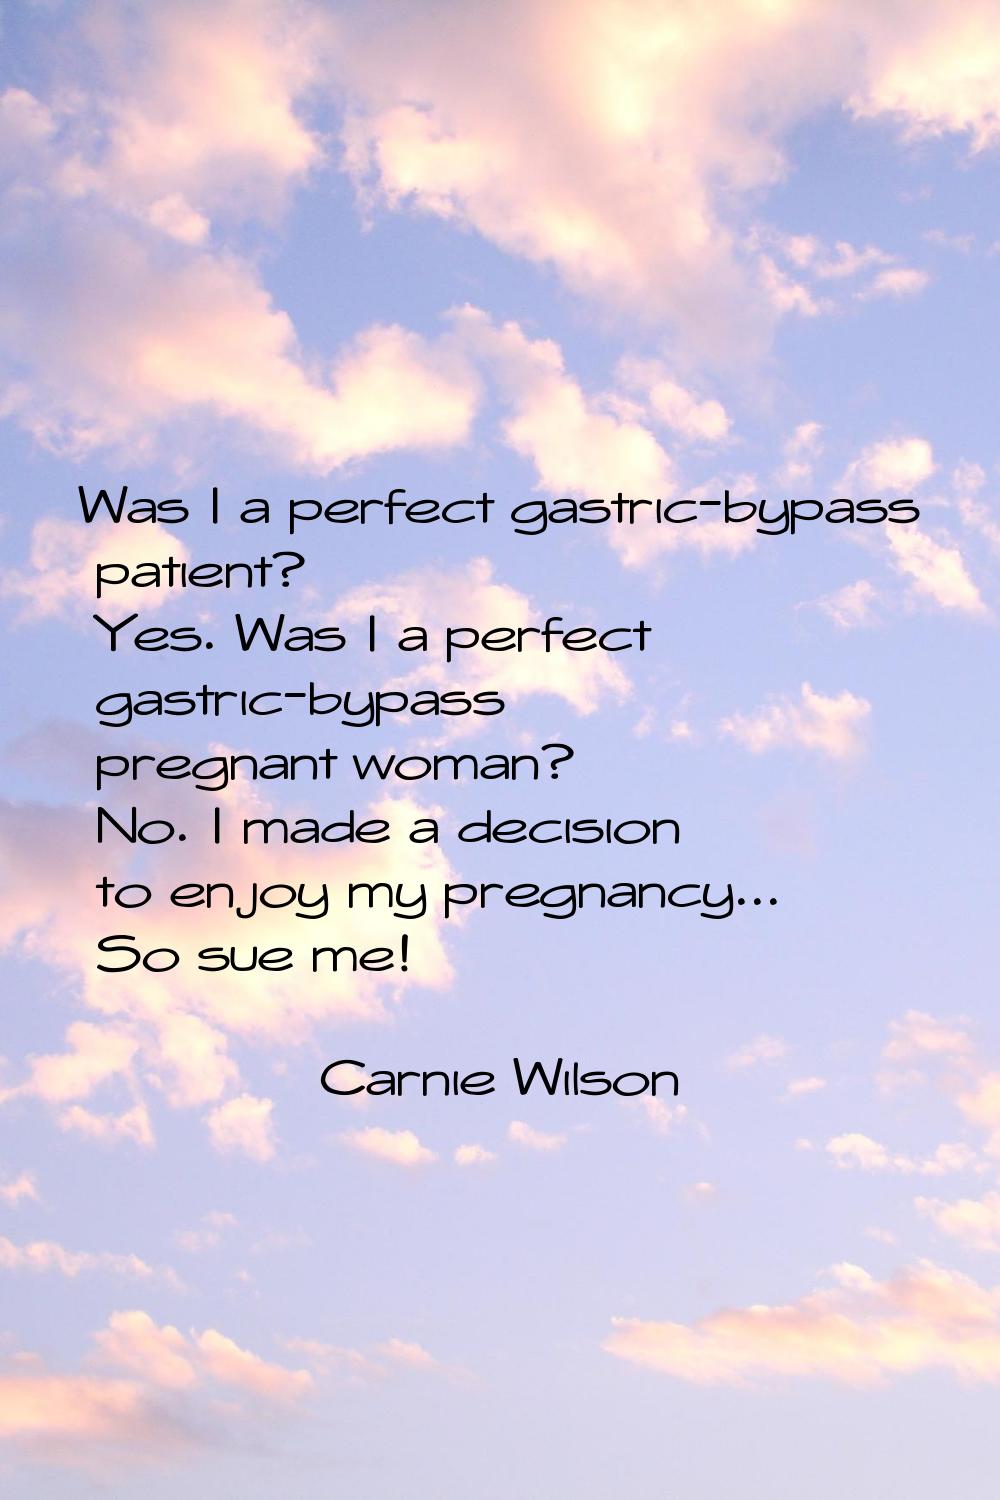 Was I a perfect gastric-bypass patient? Yes. Was I a perfect gastric-bypass pregnant woman? No. I m